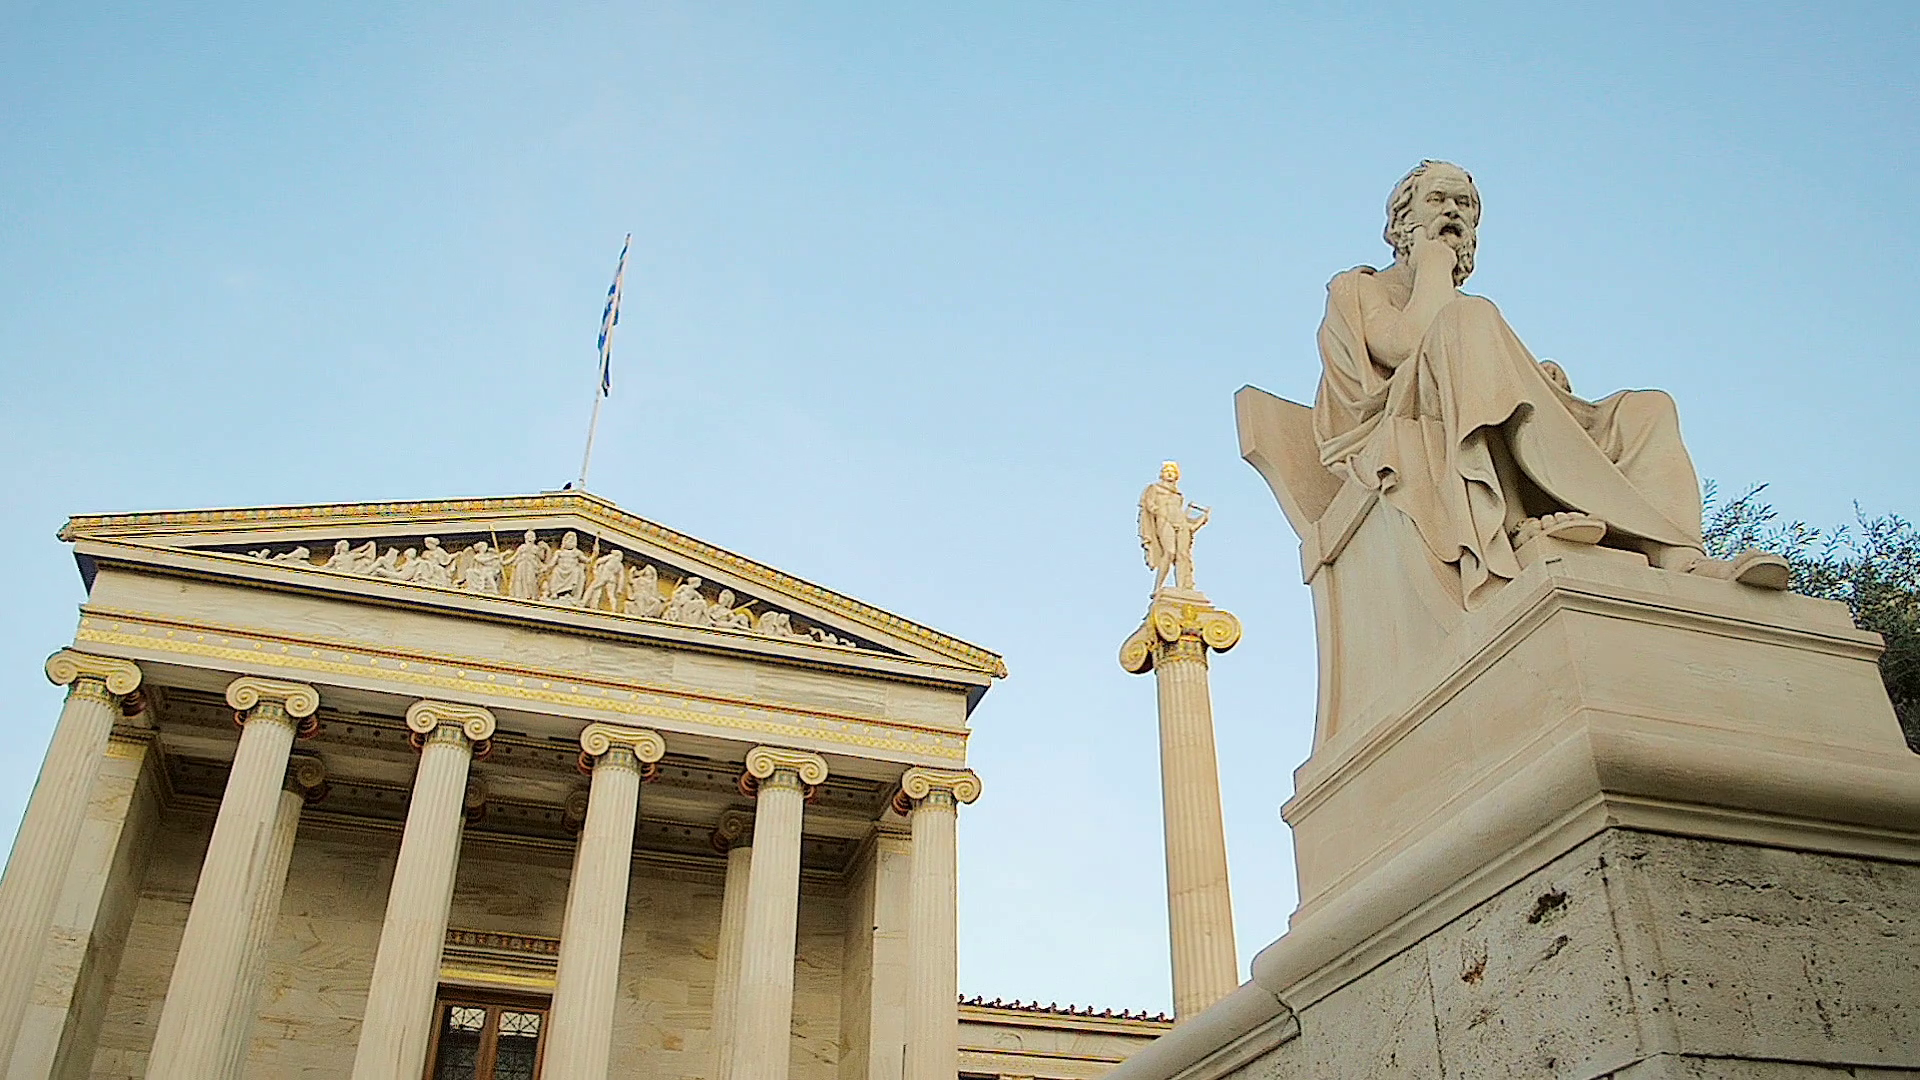 Greek Architecture Statues of the Philosophers Plato and Socrates ...